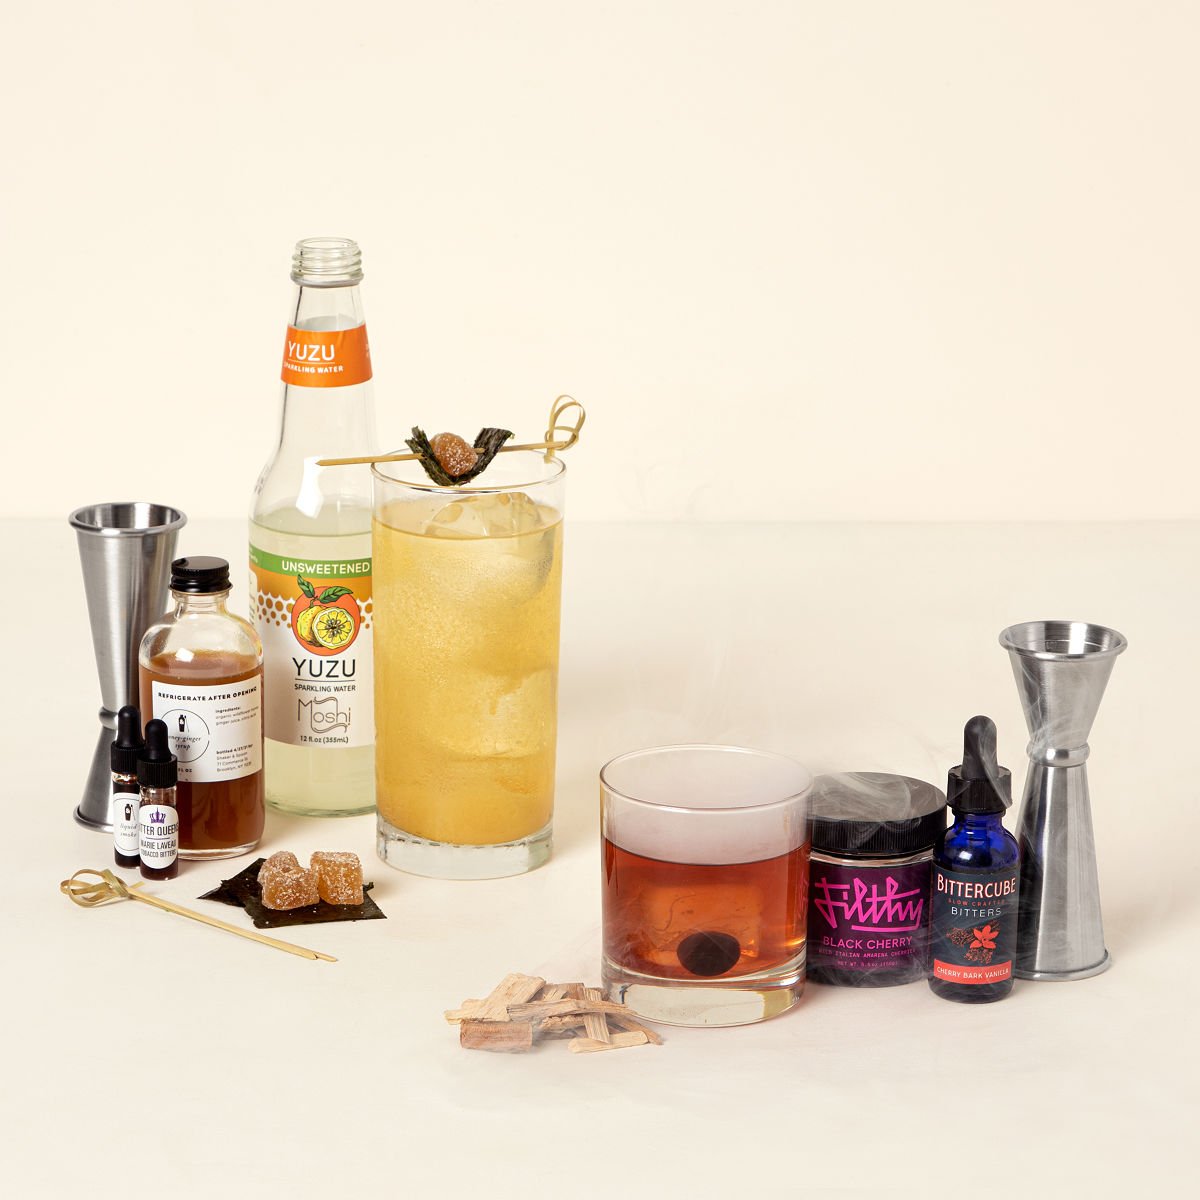 Create an artisanal drink with the craft cocktail kit